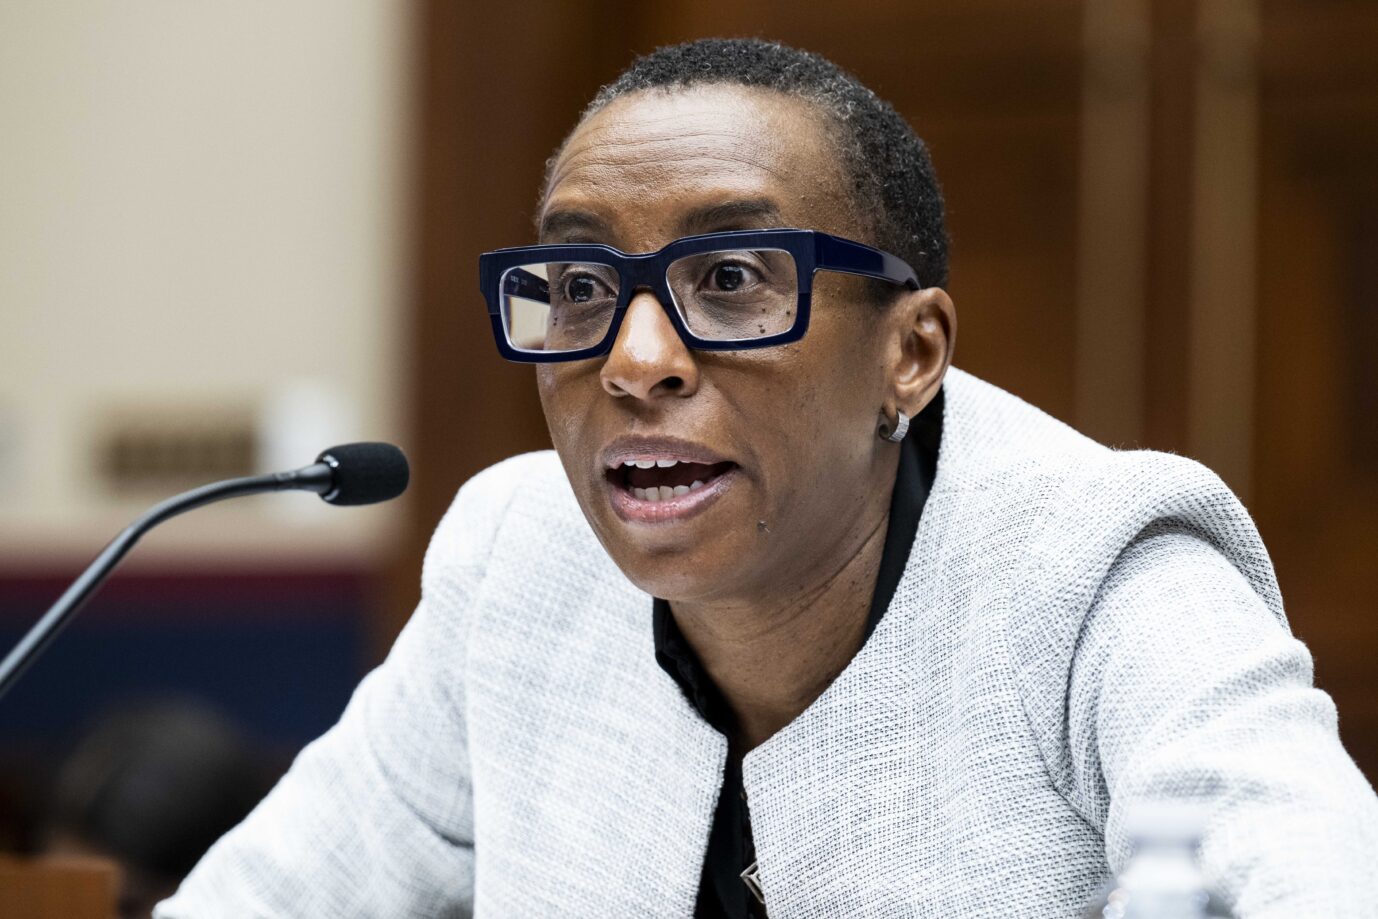 December 8, 2023: Harvard President Claudine Gay apologized for her remarks at the end of her congressional testimony during a House committee hearing. Gay said she failed to adequately denounce threats of violence against Jewish students. FILE PHOTO SHOT ON: December 5, 2023, Washington, District of Columbia, USA: CLAUDINE GAY, President, Harvard University, speaking at a House Committee on Education and the Workforce hearing on campus antisemitism at the U.S. Capitol. (Credit Image: © Michael Brochstein/ZUMA Press Wire. Sie ist Präsidentin der Uni Havard.